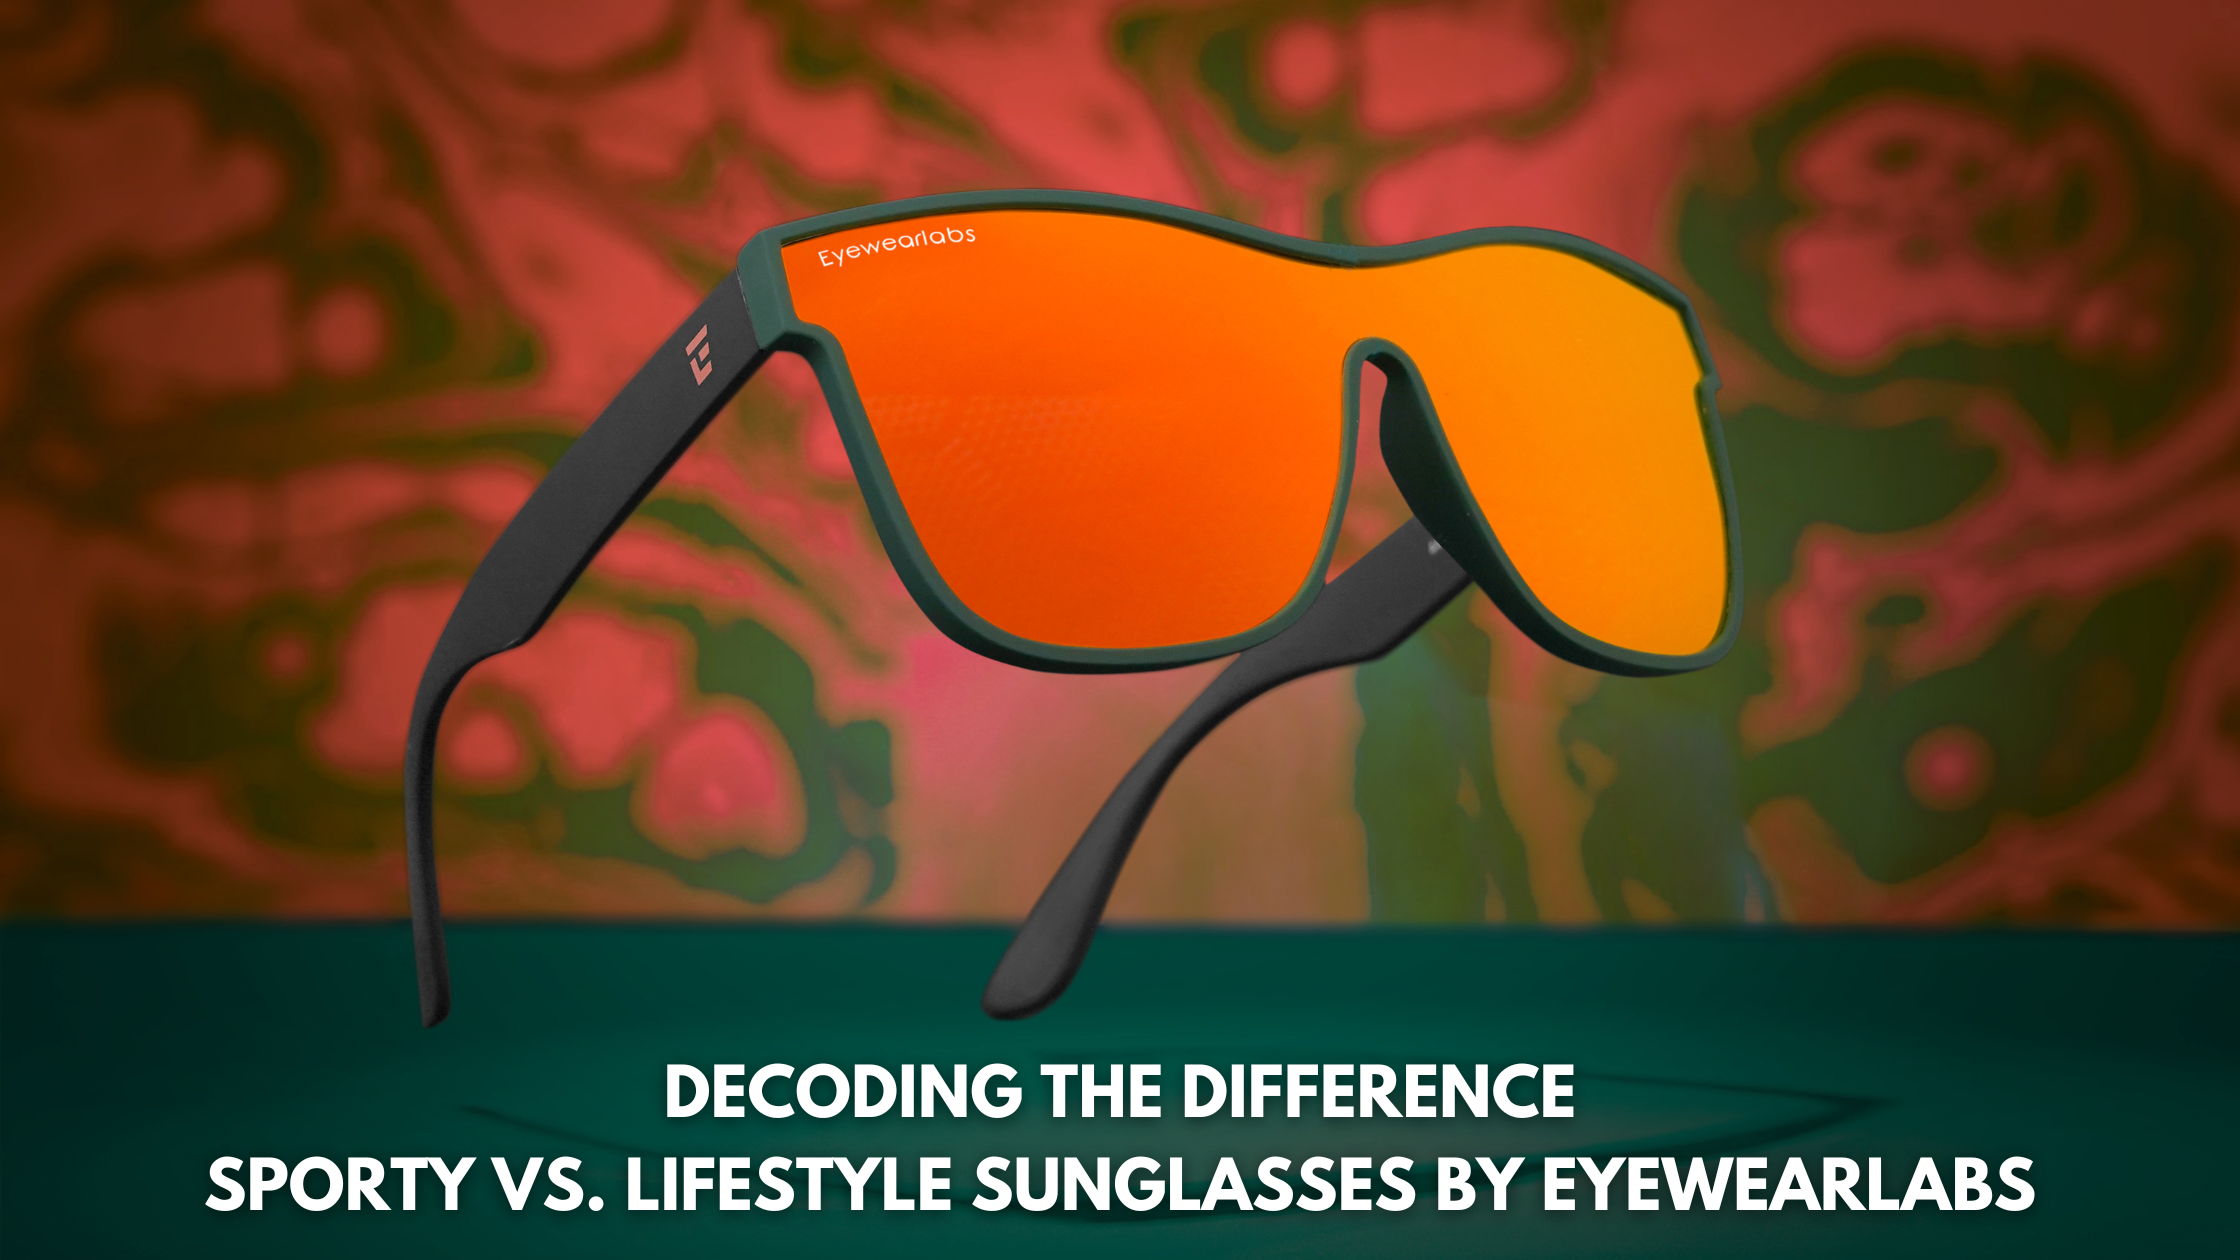 Decoding the Difference: Sporty vs. Lifestyle Sunglasses by Eyewearlabs